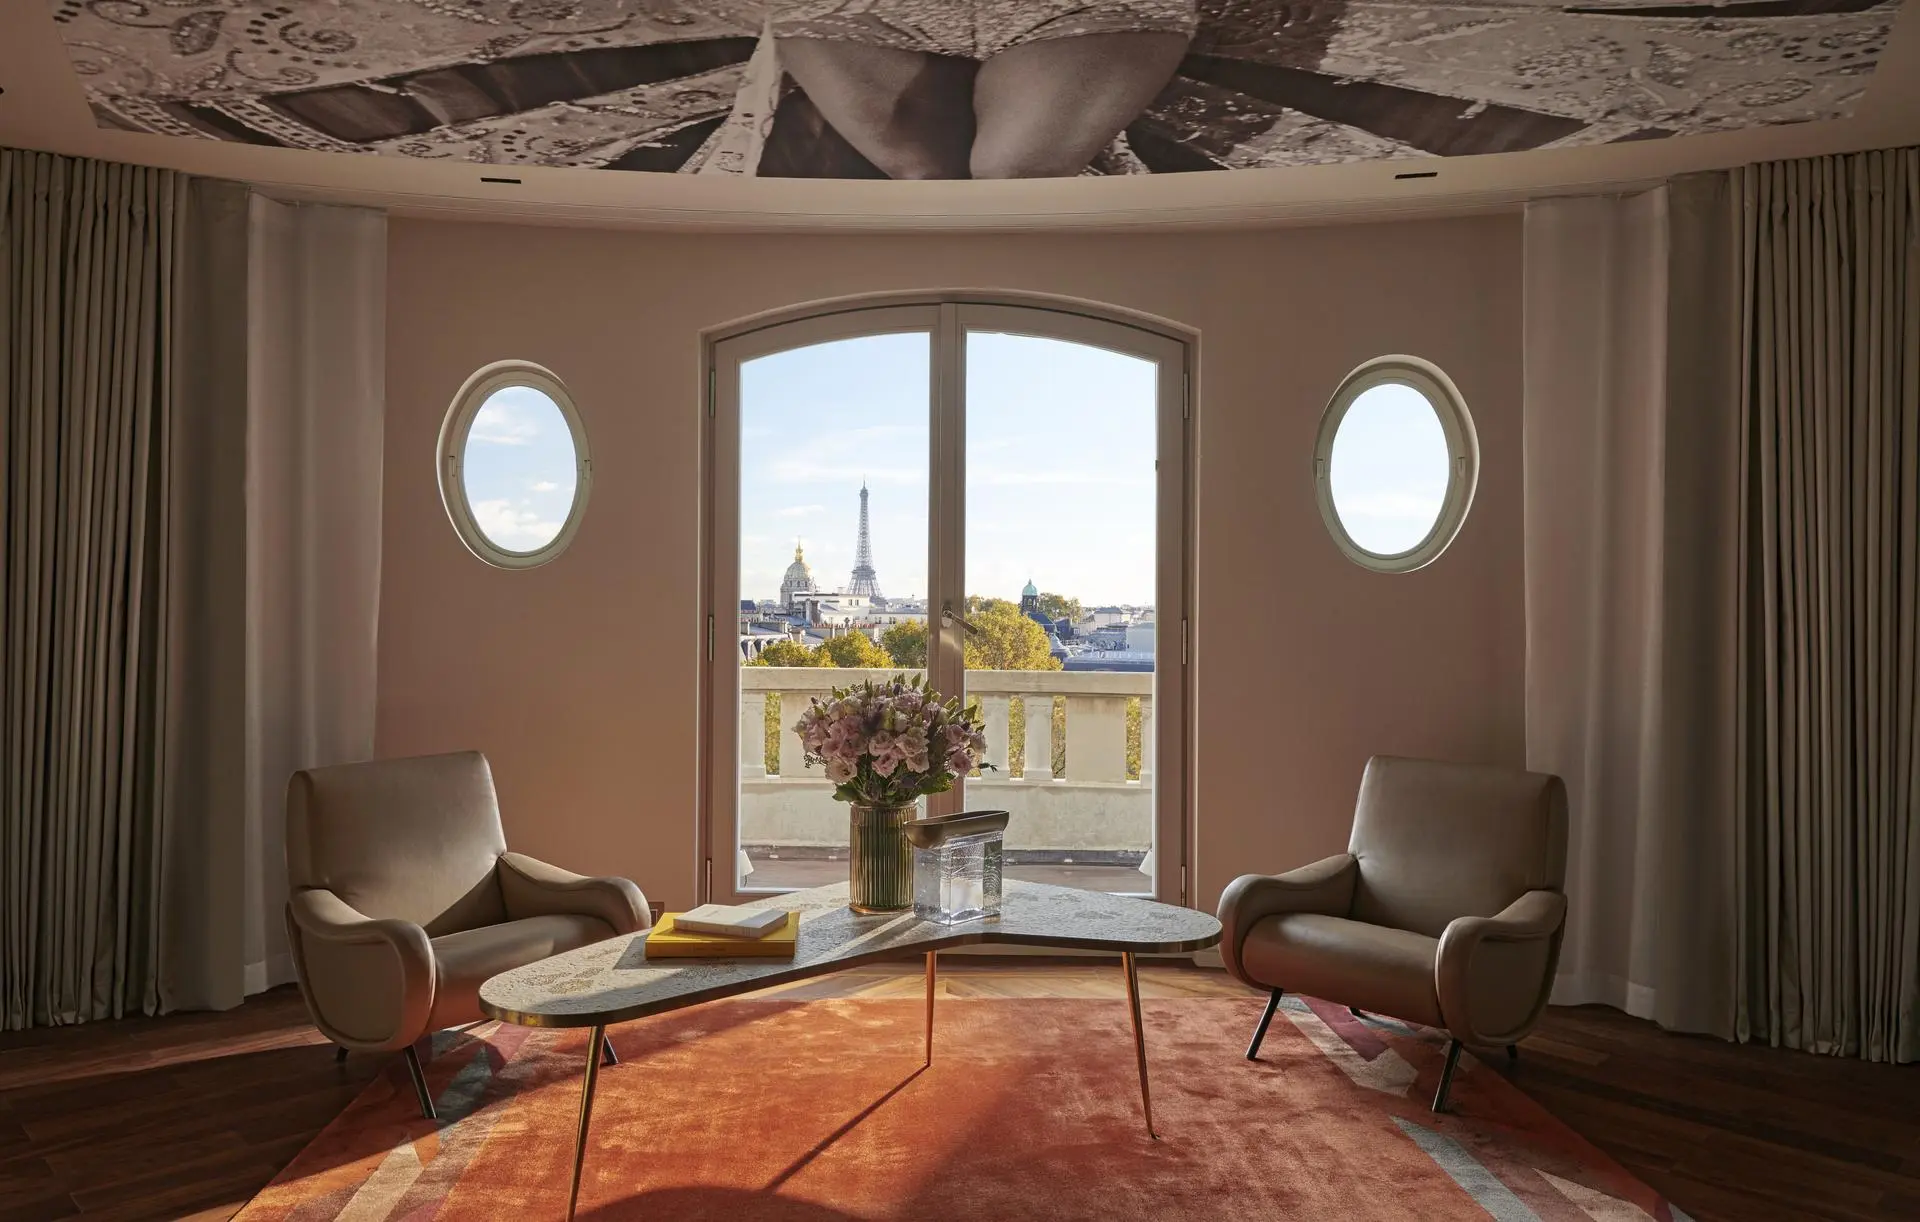 Sophisticated lounge area at Hotel Lutetia, an eco-friendly hotel in Paris, with modern armchairs and a coffee table set against the backdrop of panoramic windows offering a breathtaking view of the Eiffel Tower and Paris skyline.